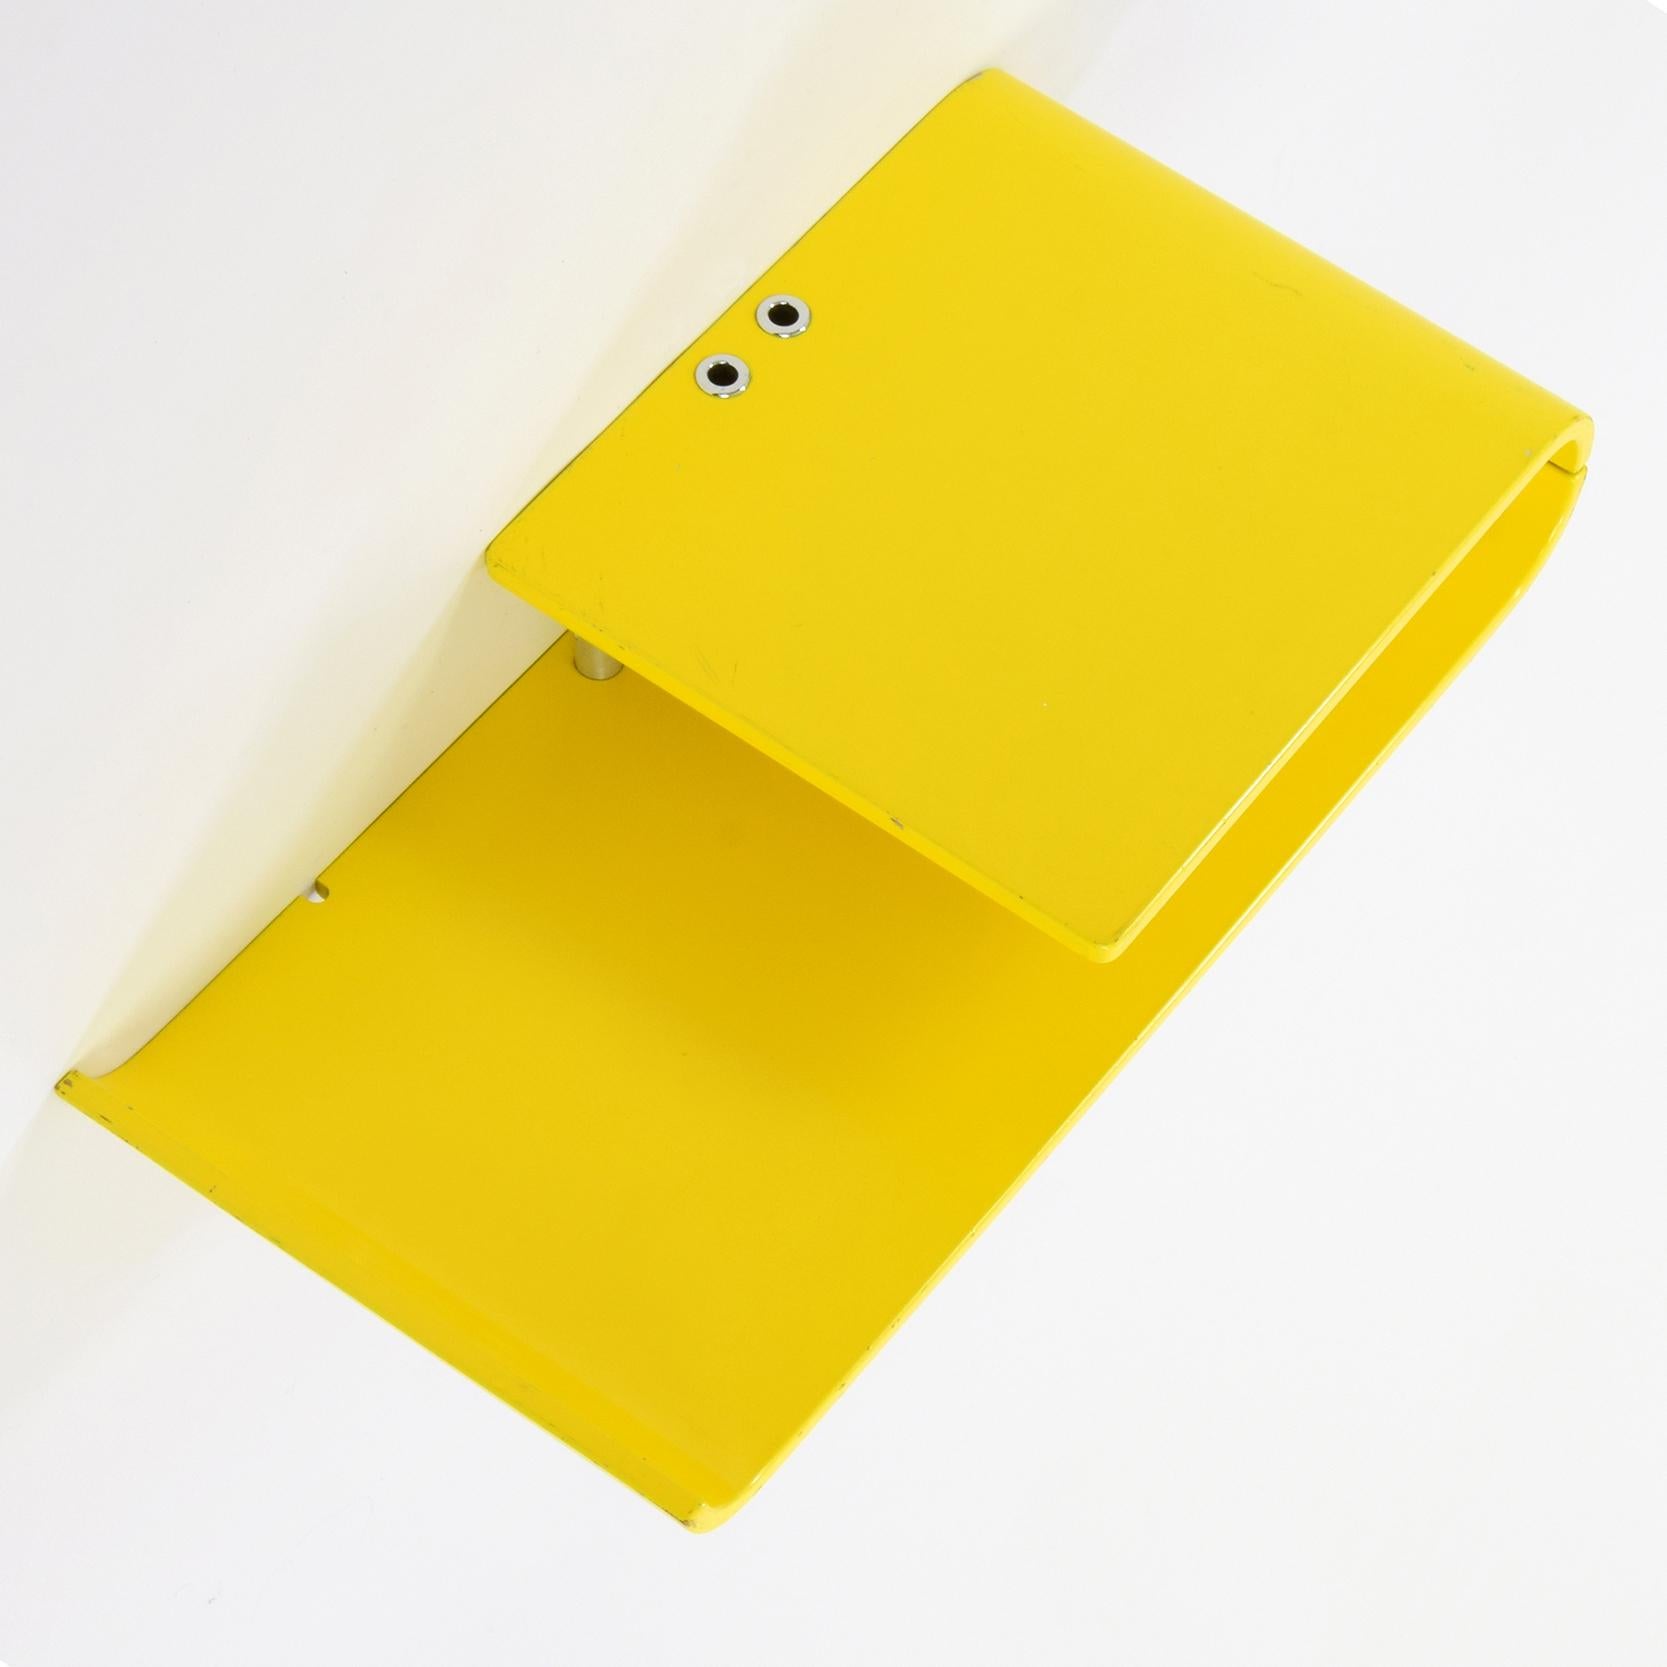 Schönbuch (manufacturer), Germany

‘Telefonkonsole’ (telephone console) wall-mounted shelf unit with pen stands.
Yellow lacquered formed plywood, metal fittings, chrome pen stands.
Manufacturer’s label to underside.

A super little shelf unit,